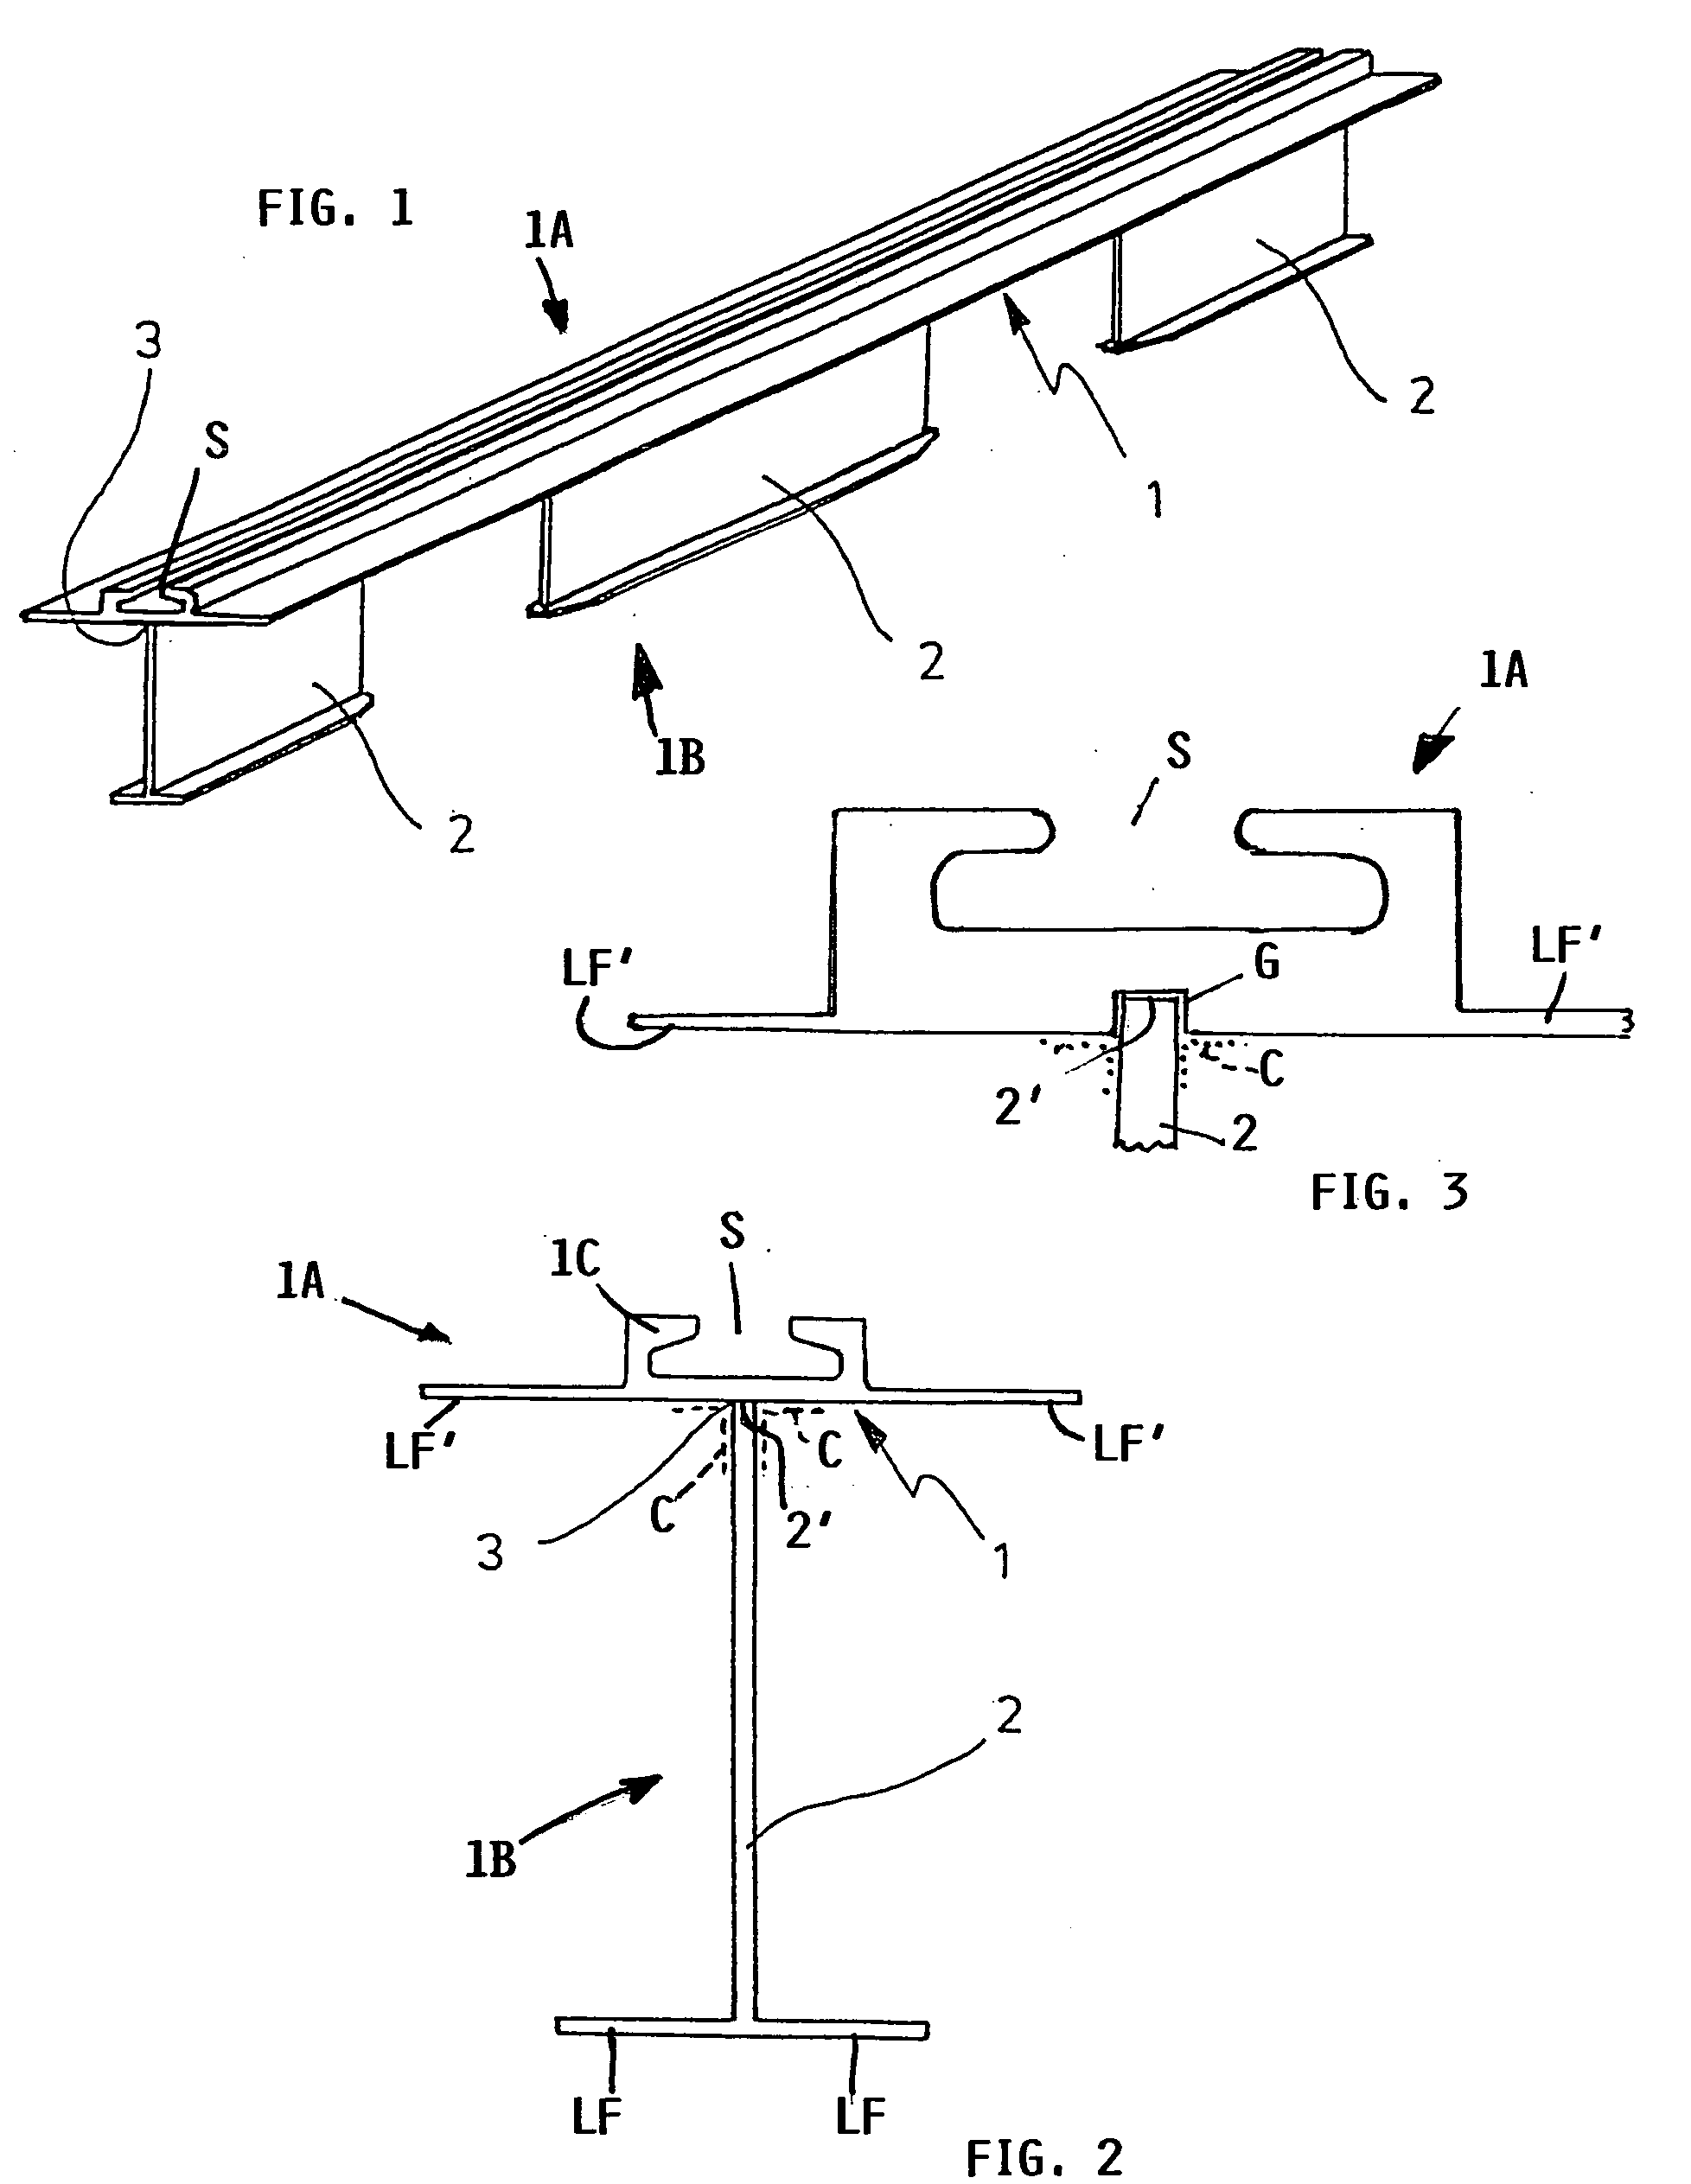 Seat mounting rail, particularly for a commercial aircraft